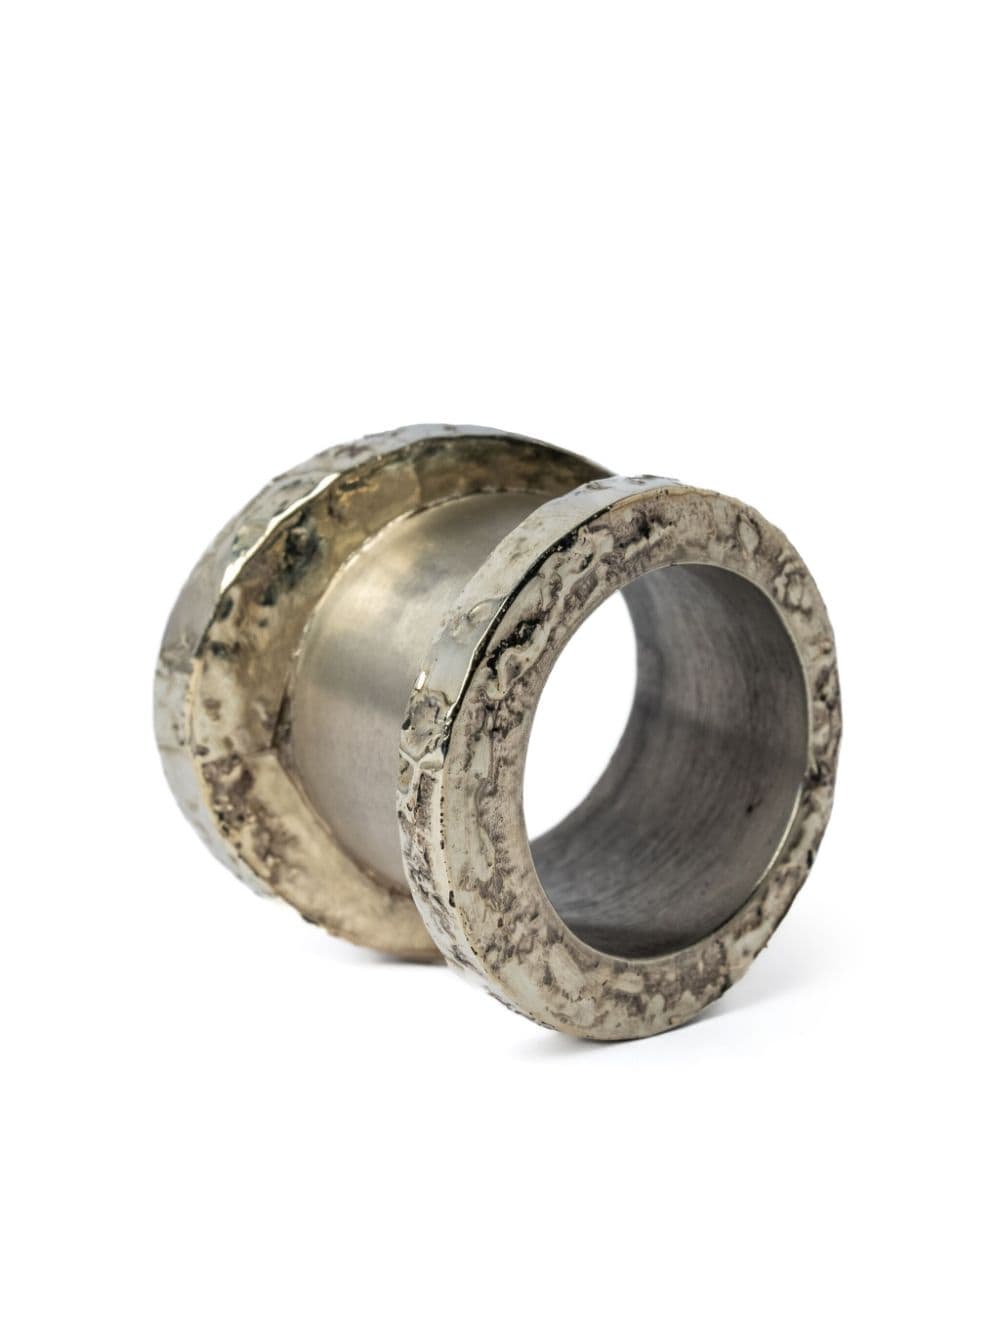 Parts of Four Chasm distressed ring - Silver von Parts of Four